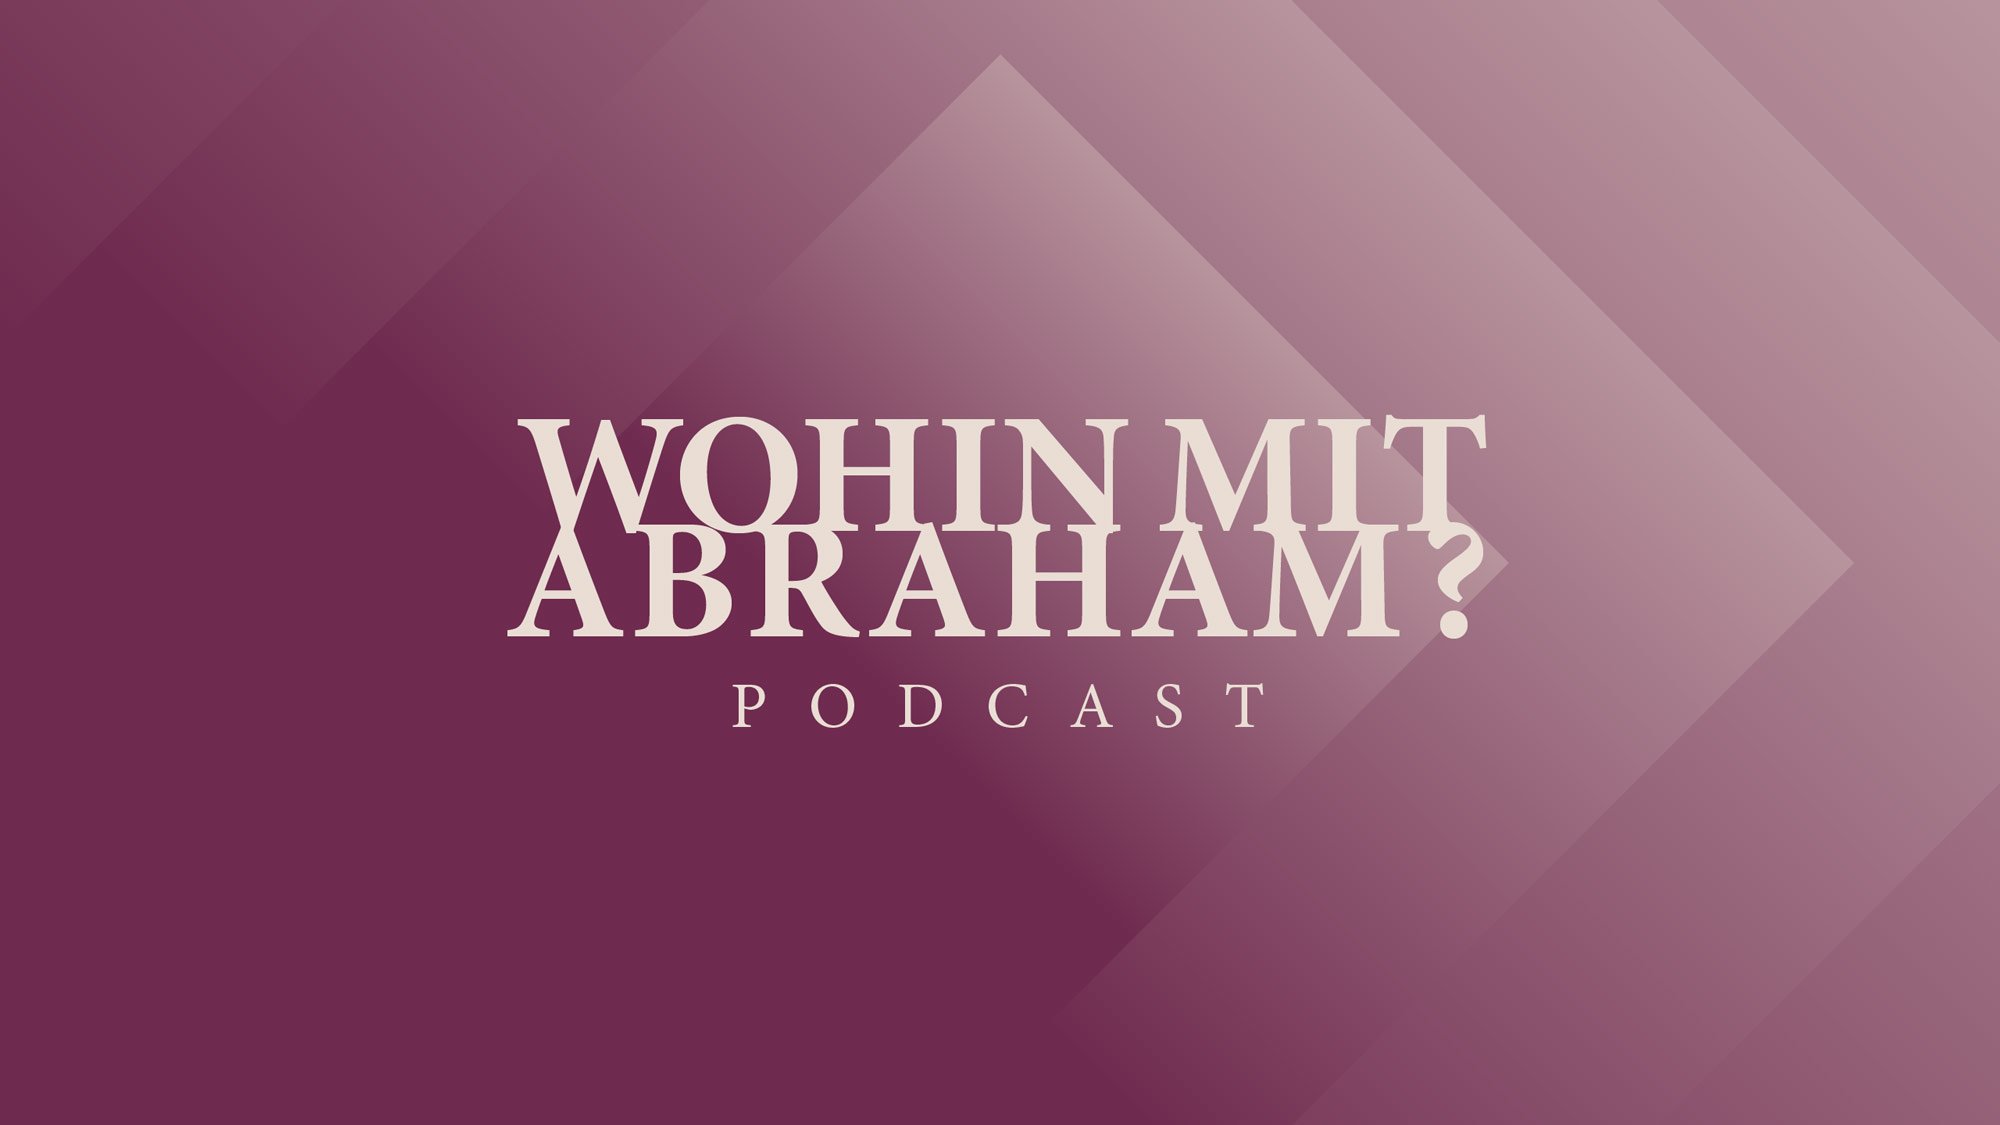 Podcast series "Where to go with Abraham?"